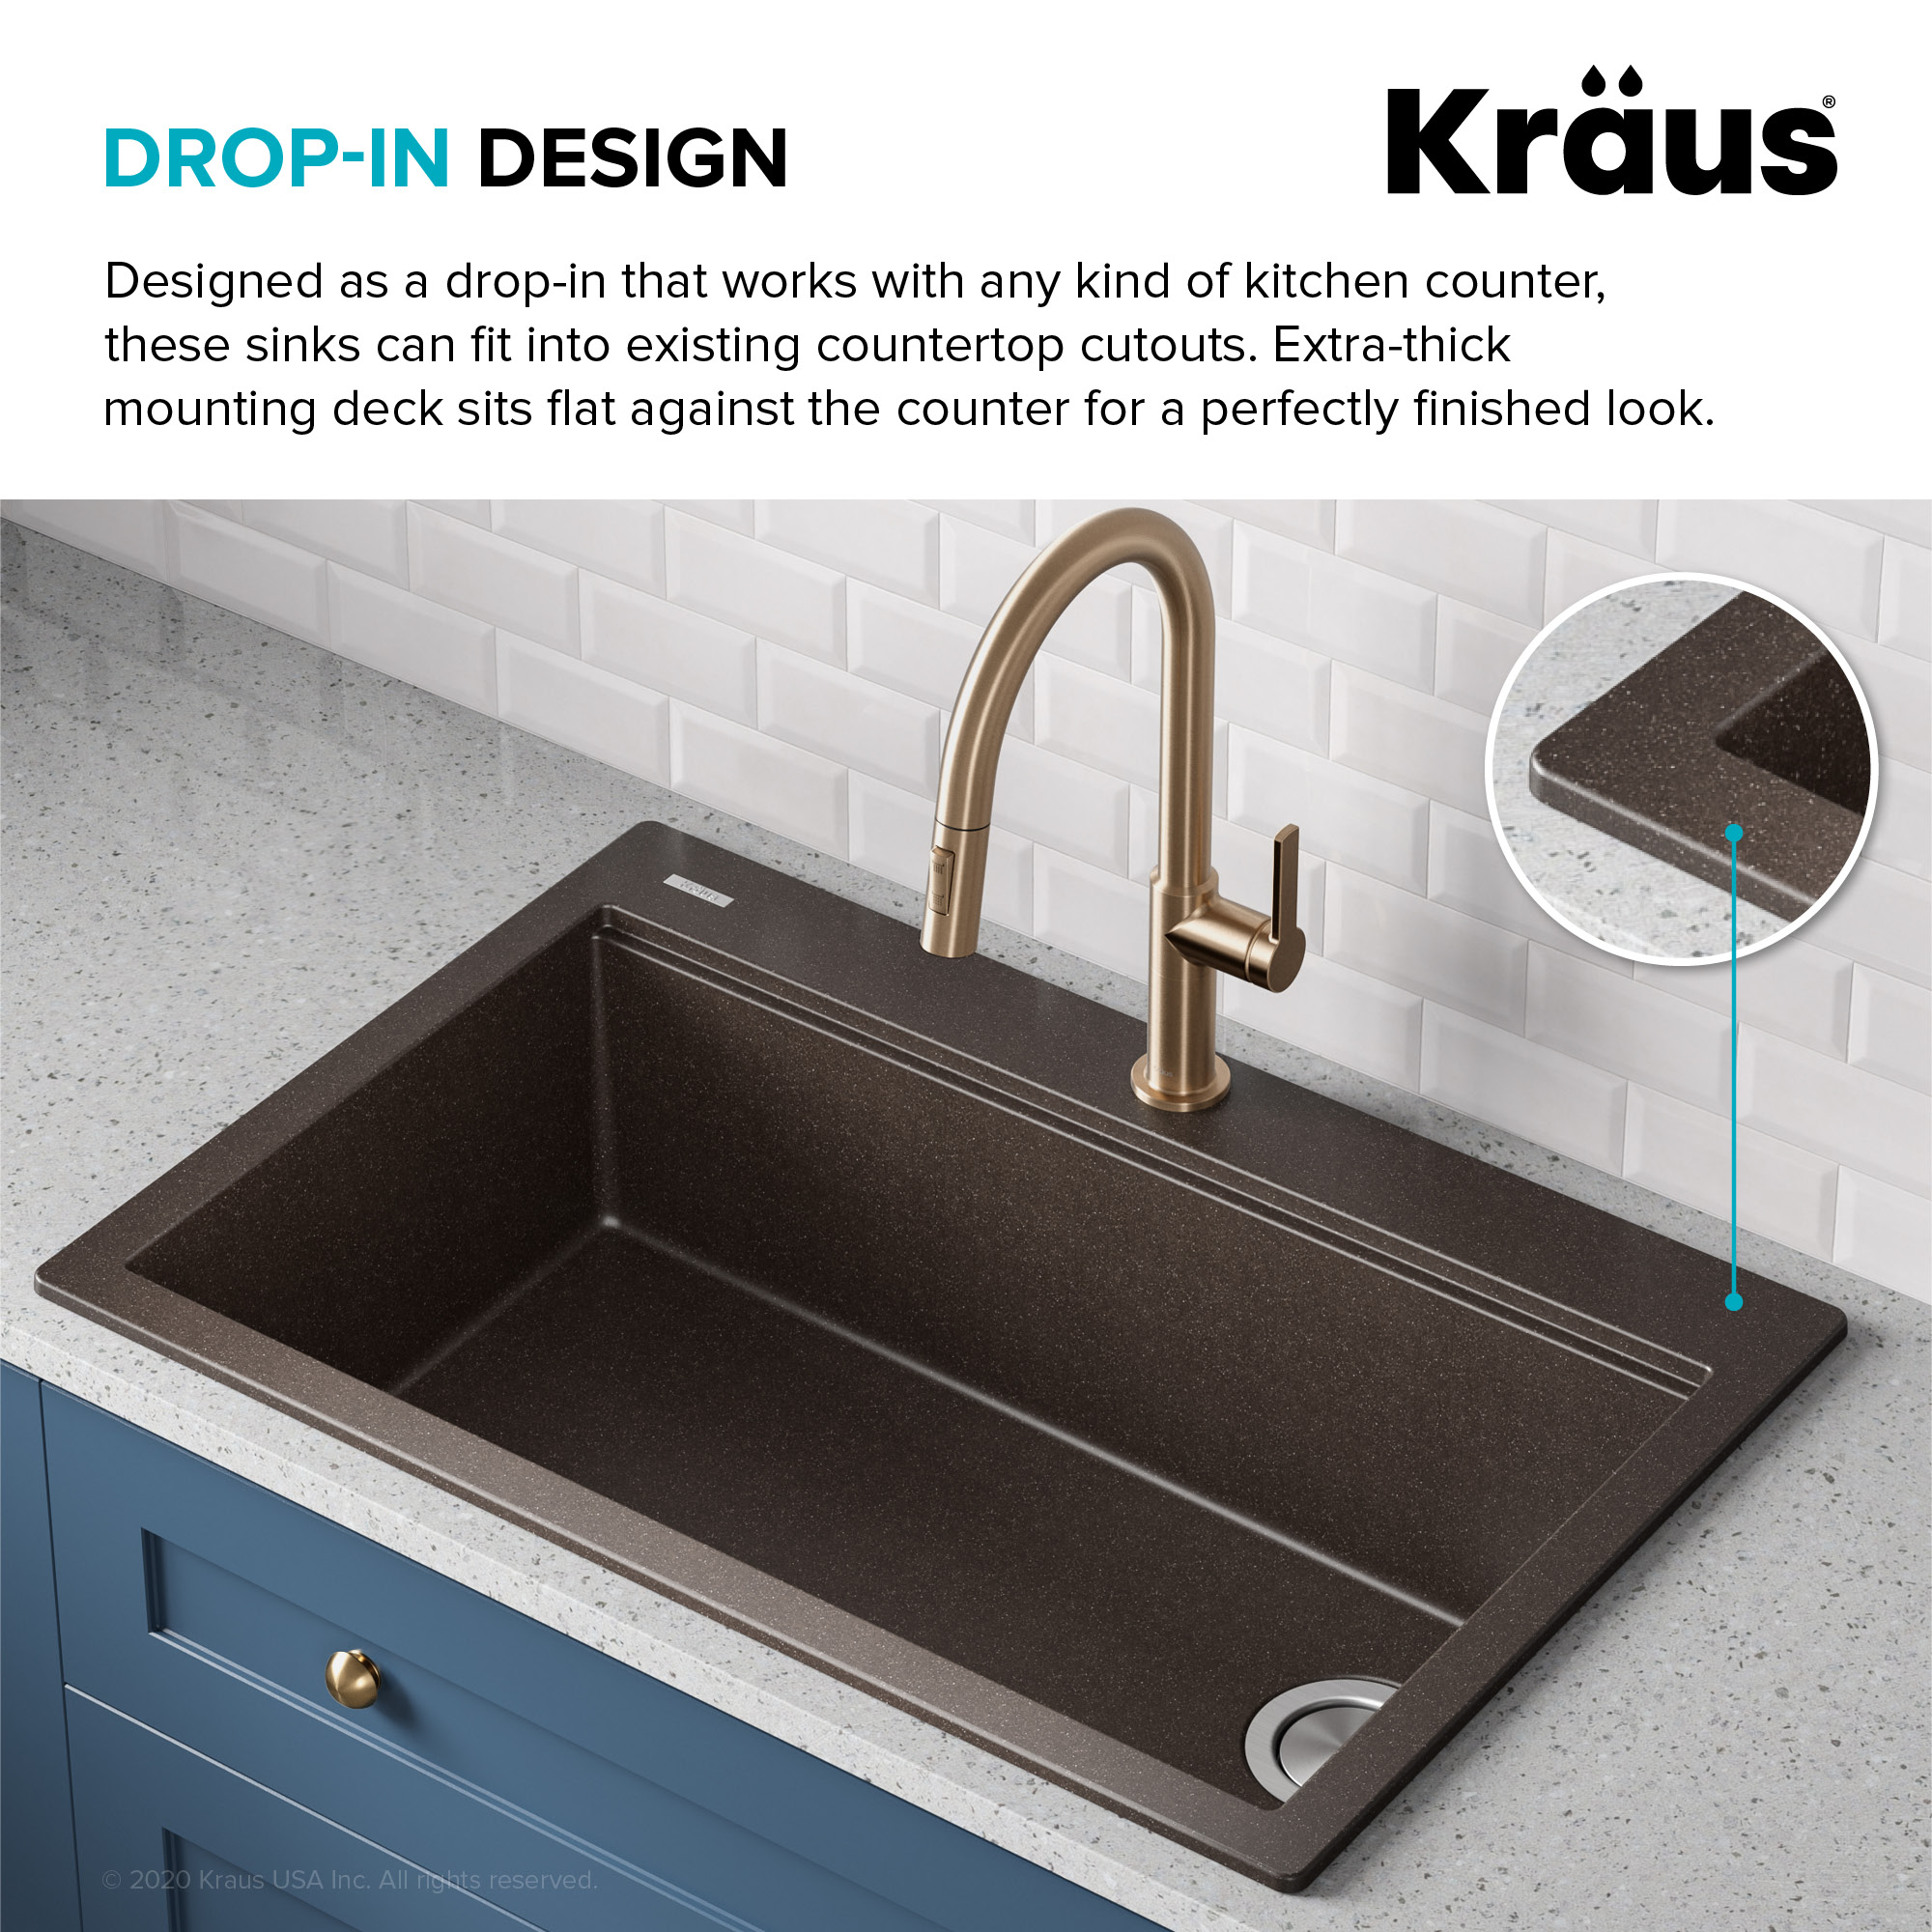 Kraus Bellucci Workstation 33 inch Drop-In Granite Composite Single Bowl Kitchen Sink in Metallic Brown with Accessories - image 3 of 13